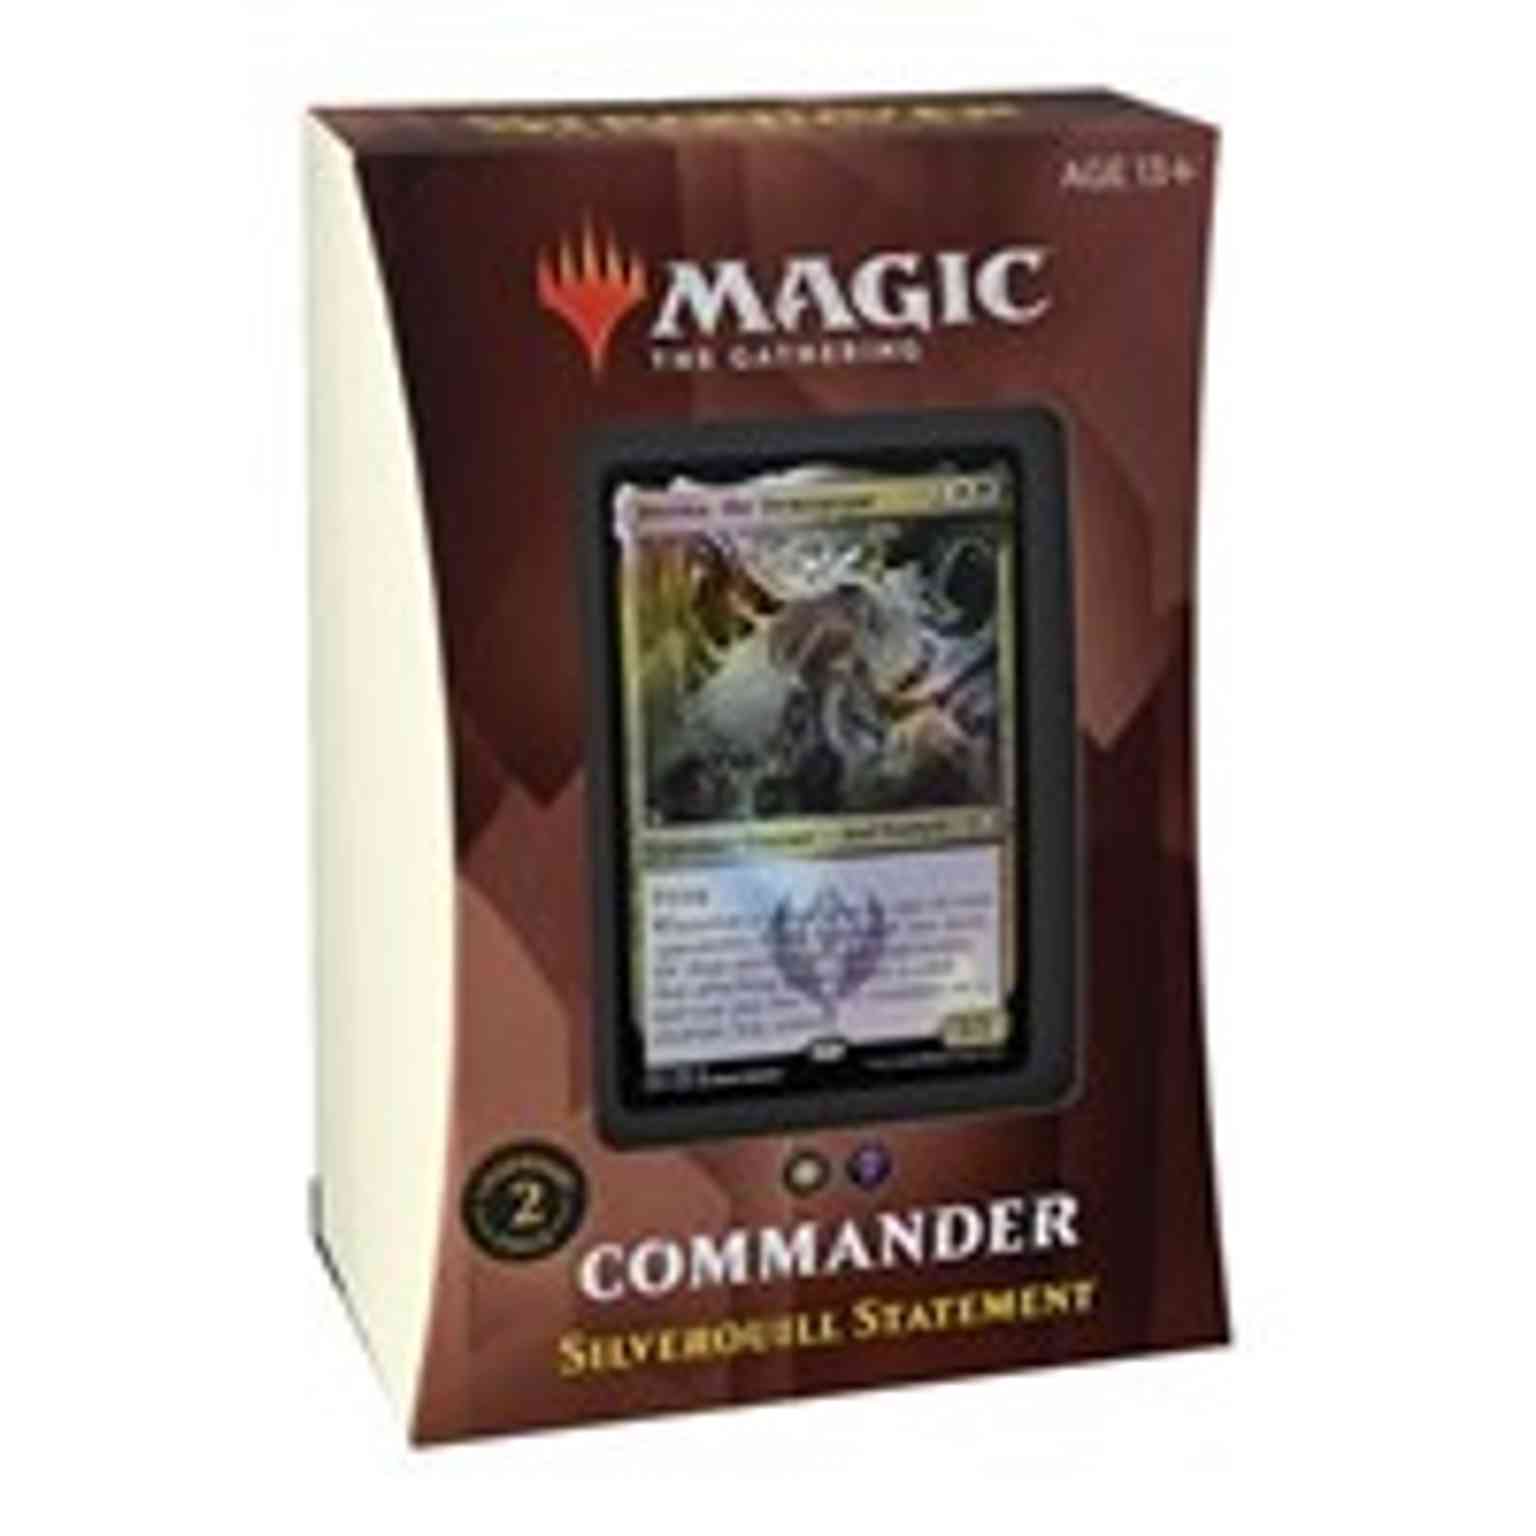 Commander 2021 Deck - Silverquill Statement magic card front